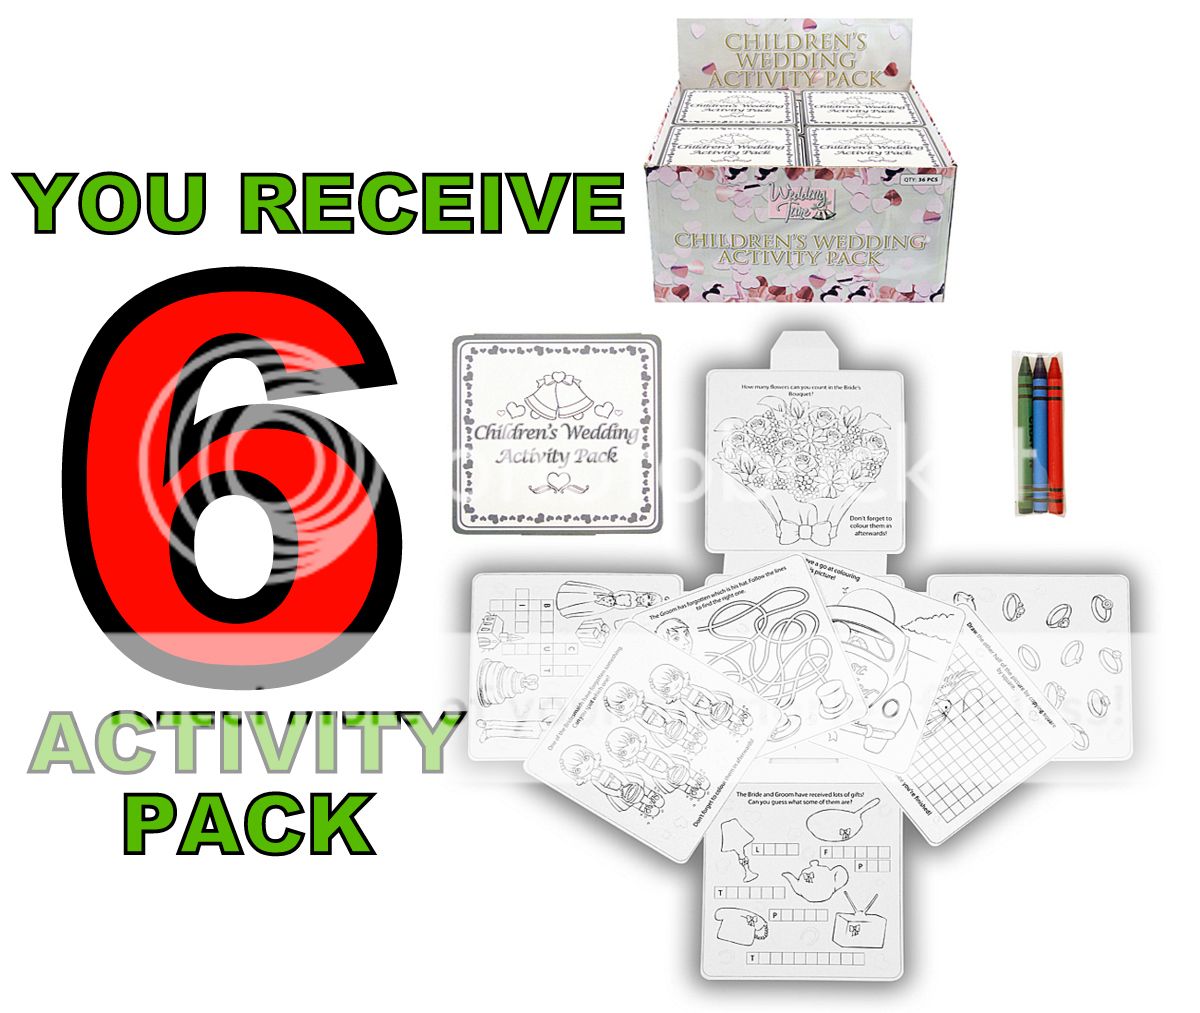 Kids Childrens Wedding Activity Pack Puzzles Crayons Colouring Book Travel Games